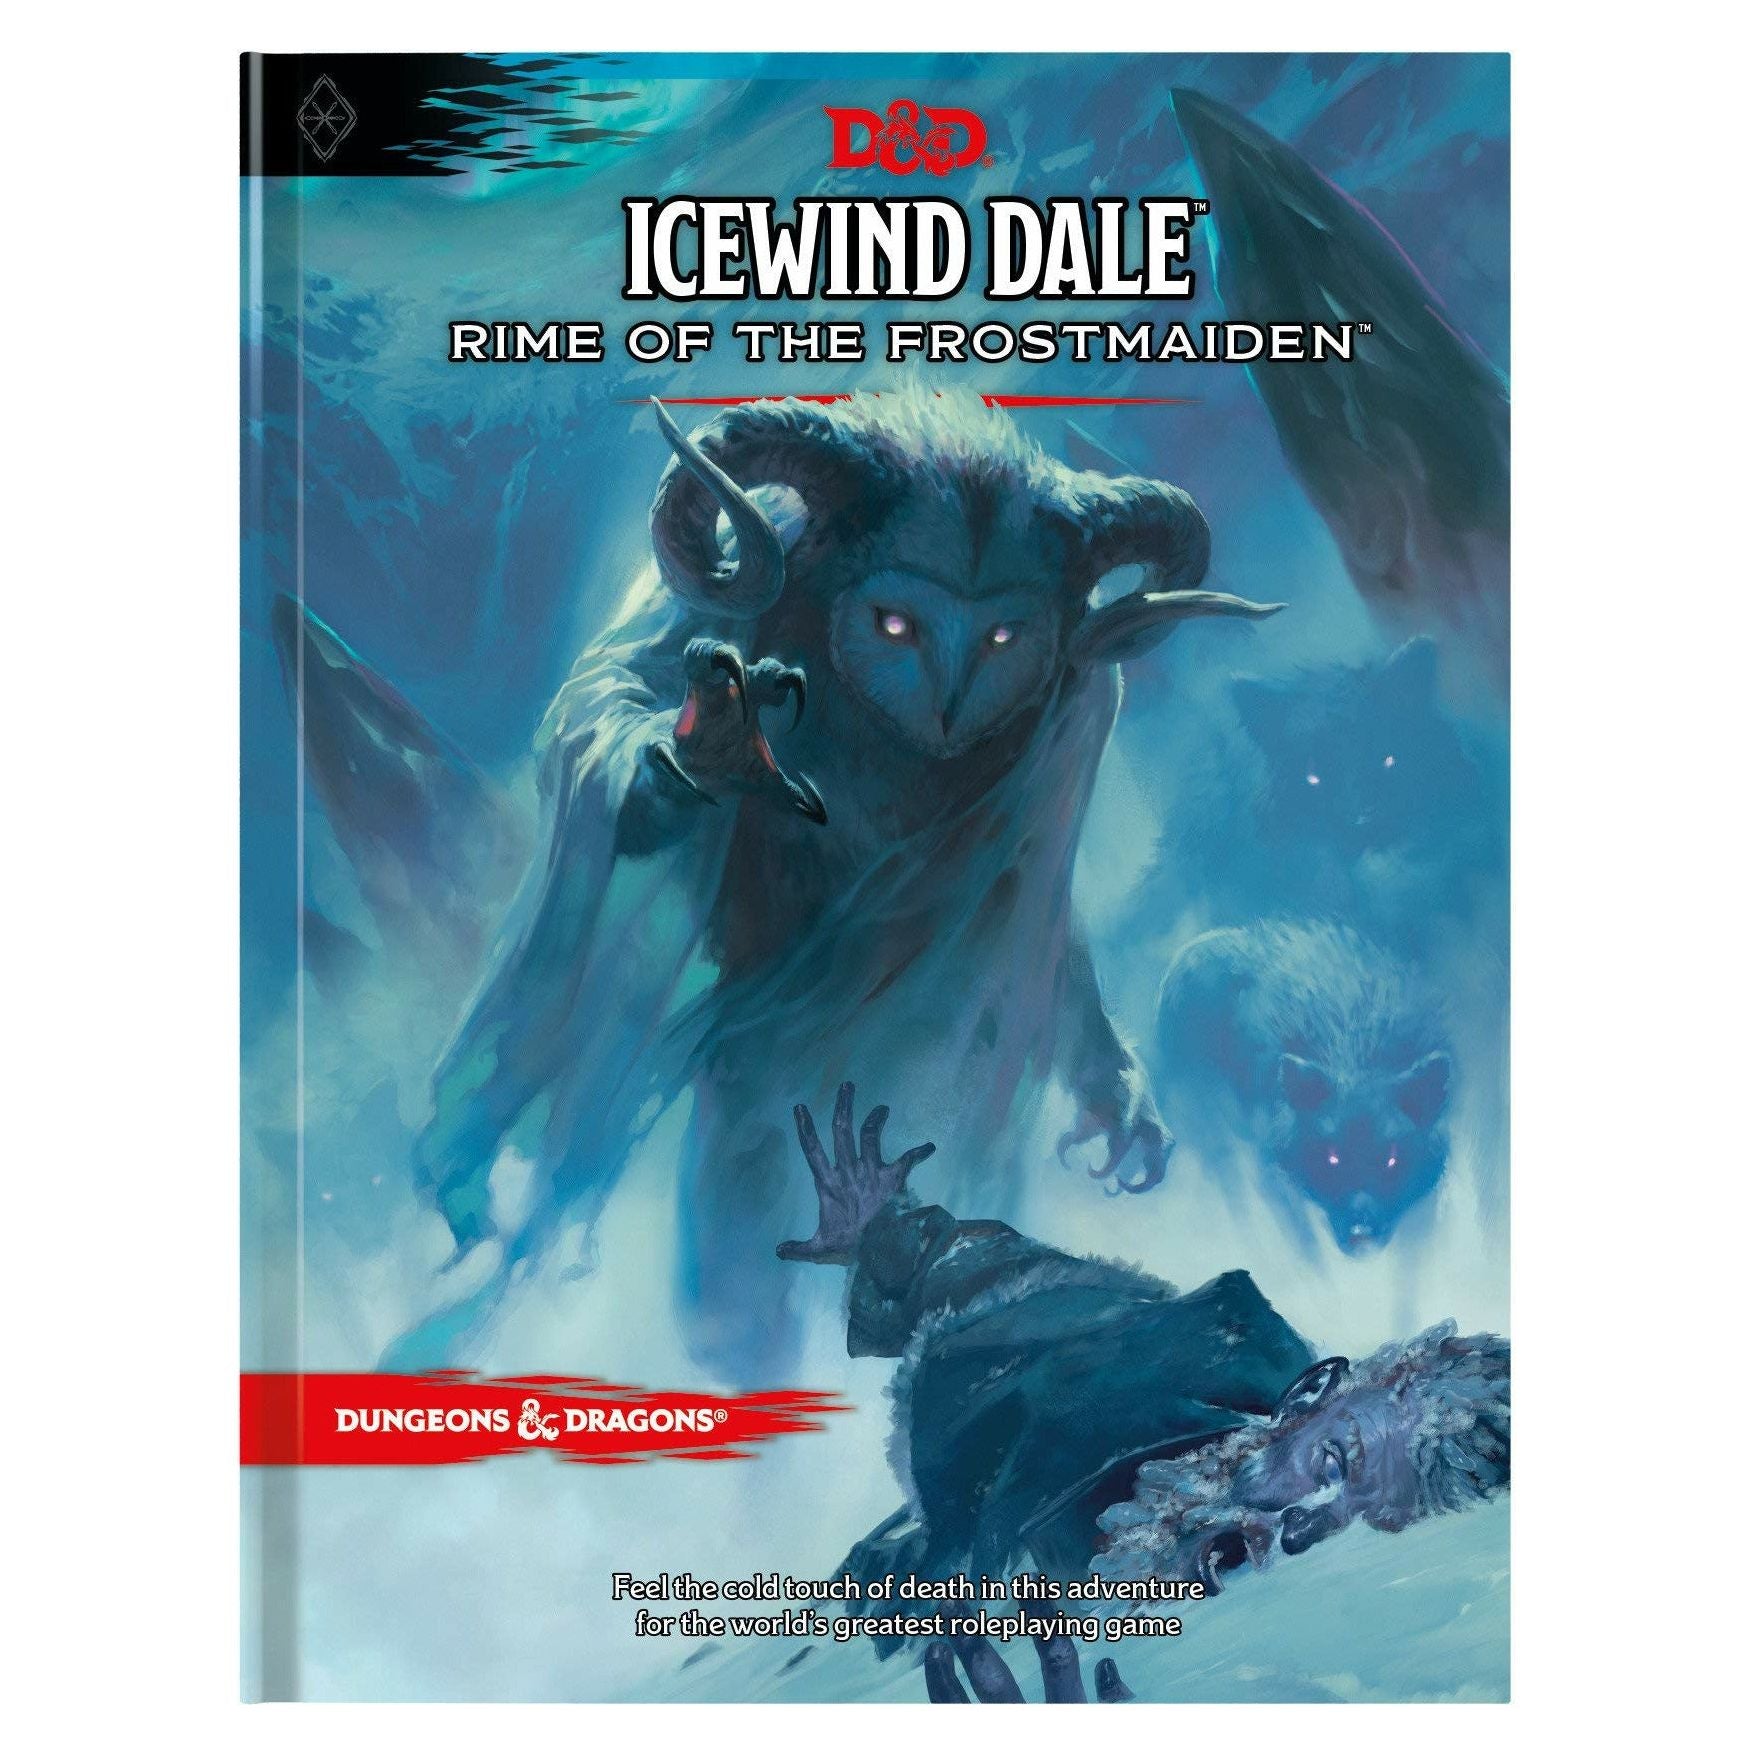 D&D - Icewind Dale - Rime Of The Frostmaiden